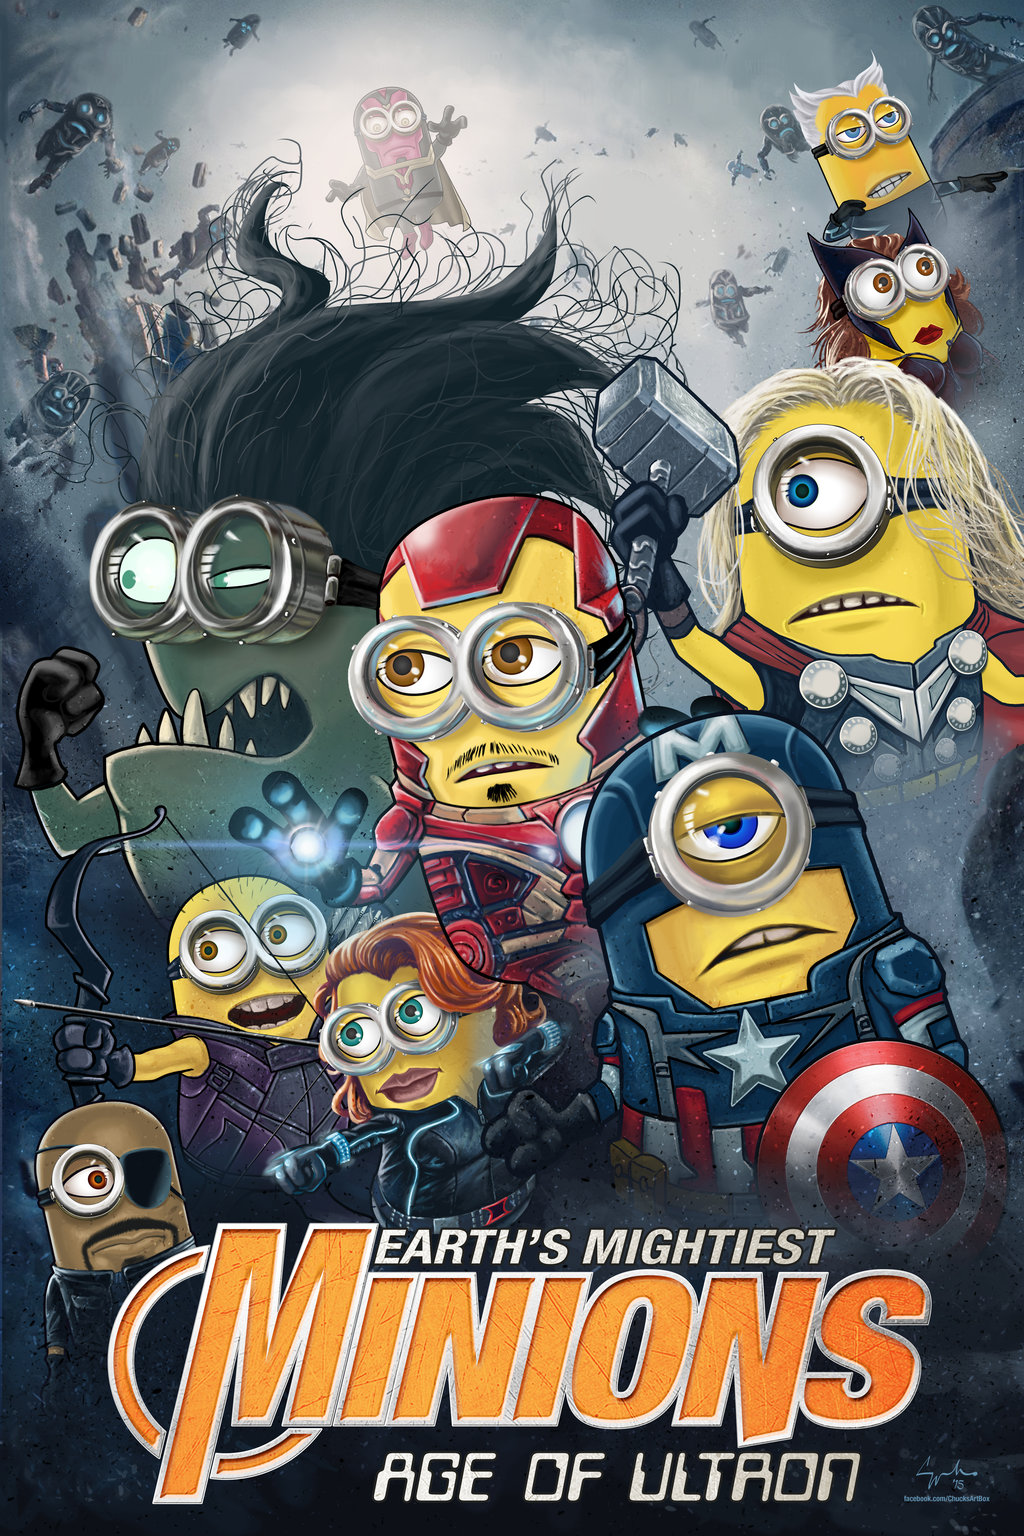 Earths Mightiest Minions Avengers Age of Ultron by ChuckMullins on